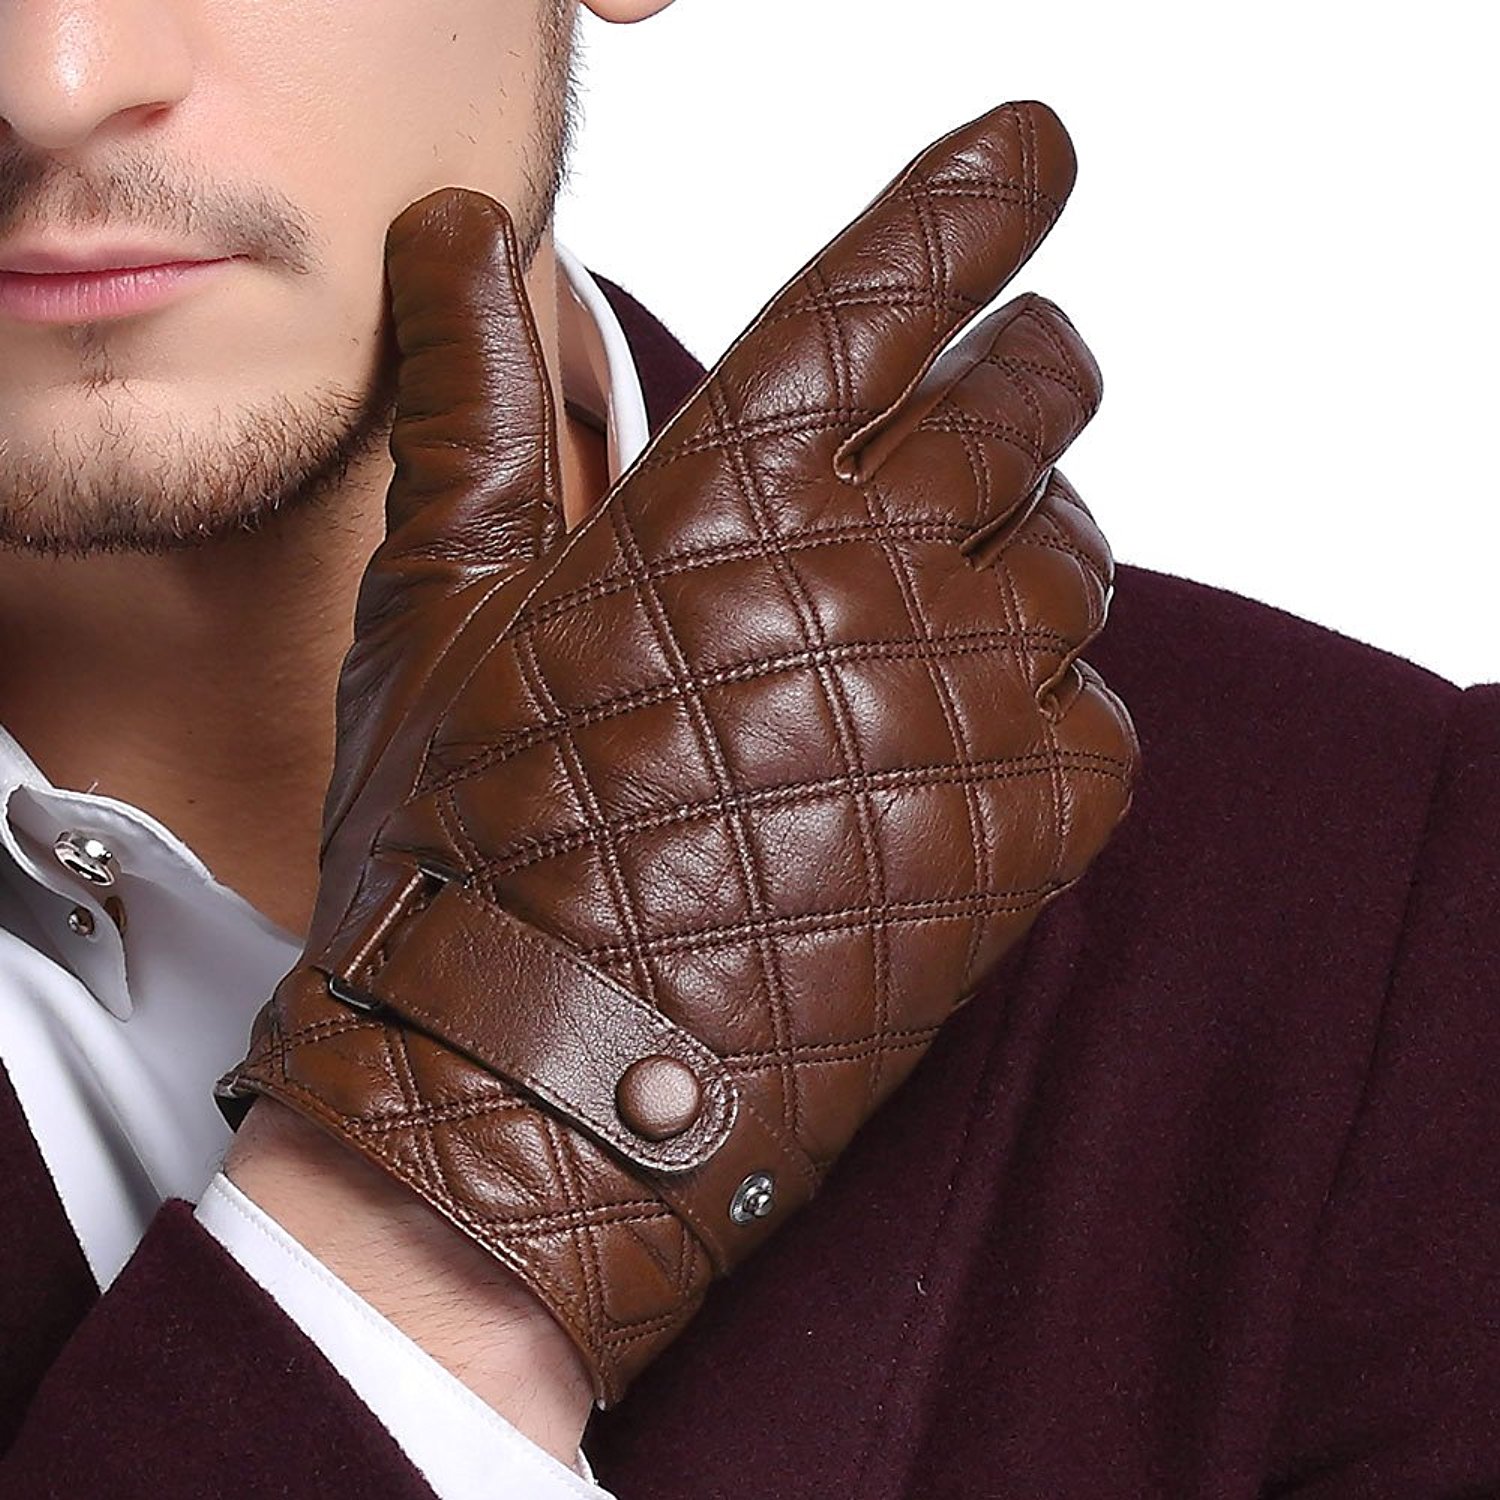 History of Vintage Men's Gloves - 1900 to 1960s